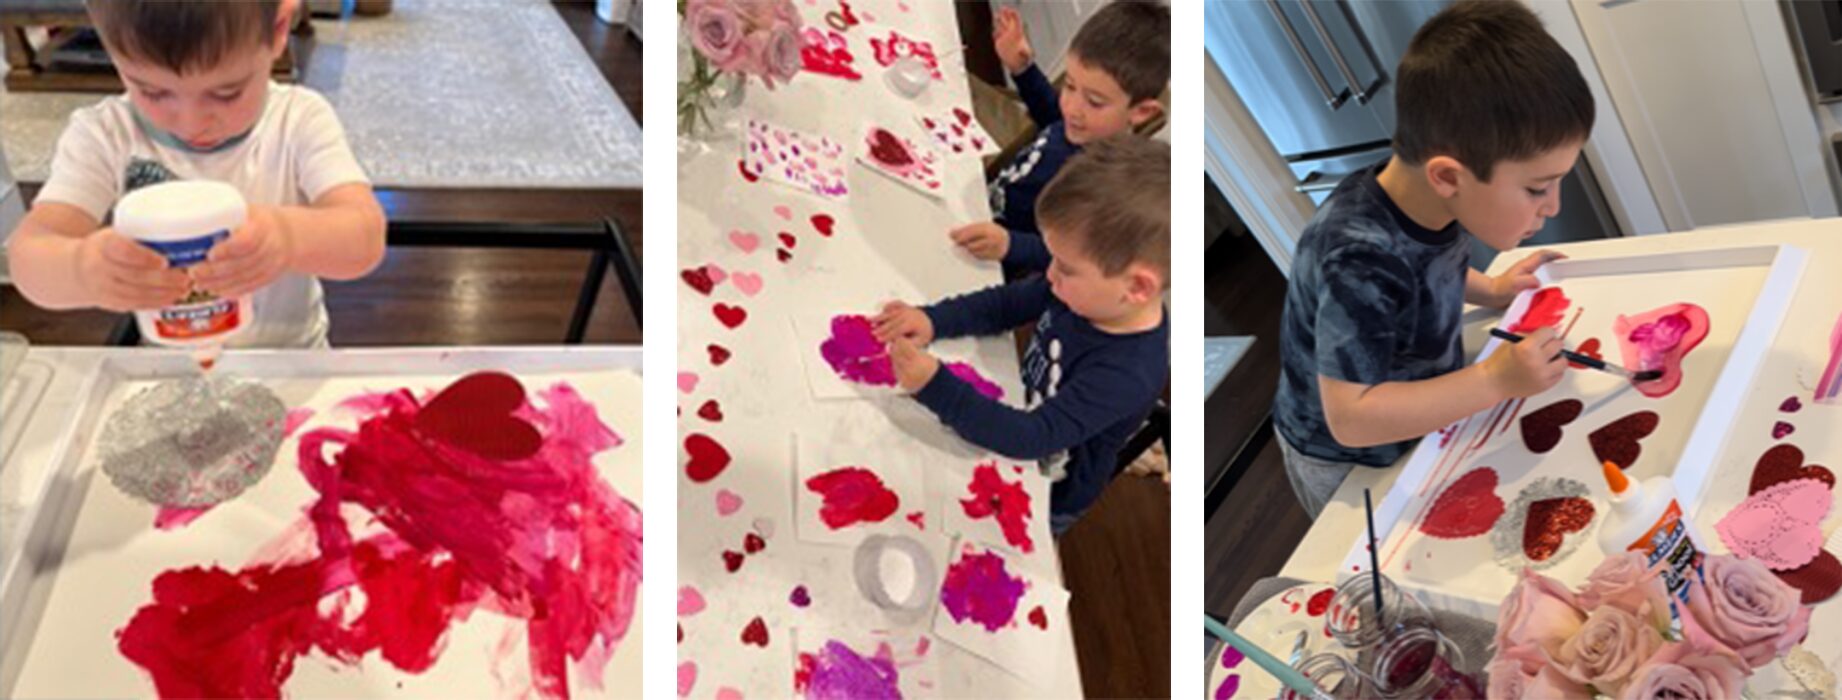 Three separate photos of boys working on Valentine's Day Crafts with a variety of materials.